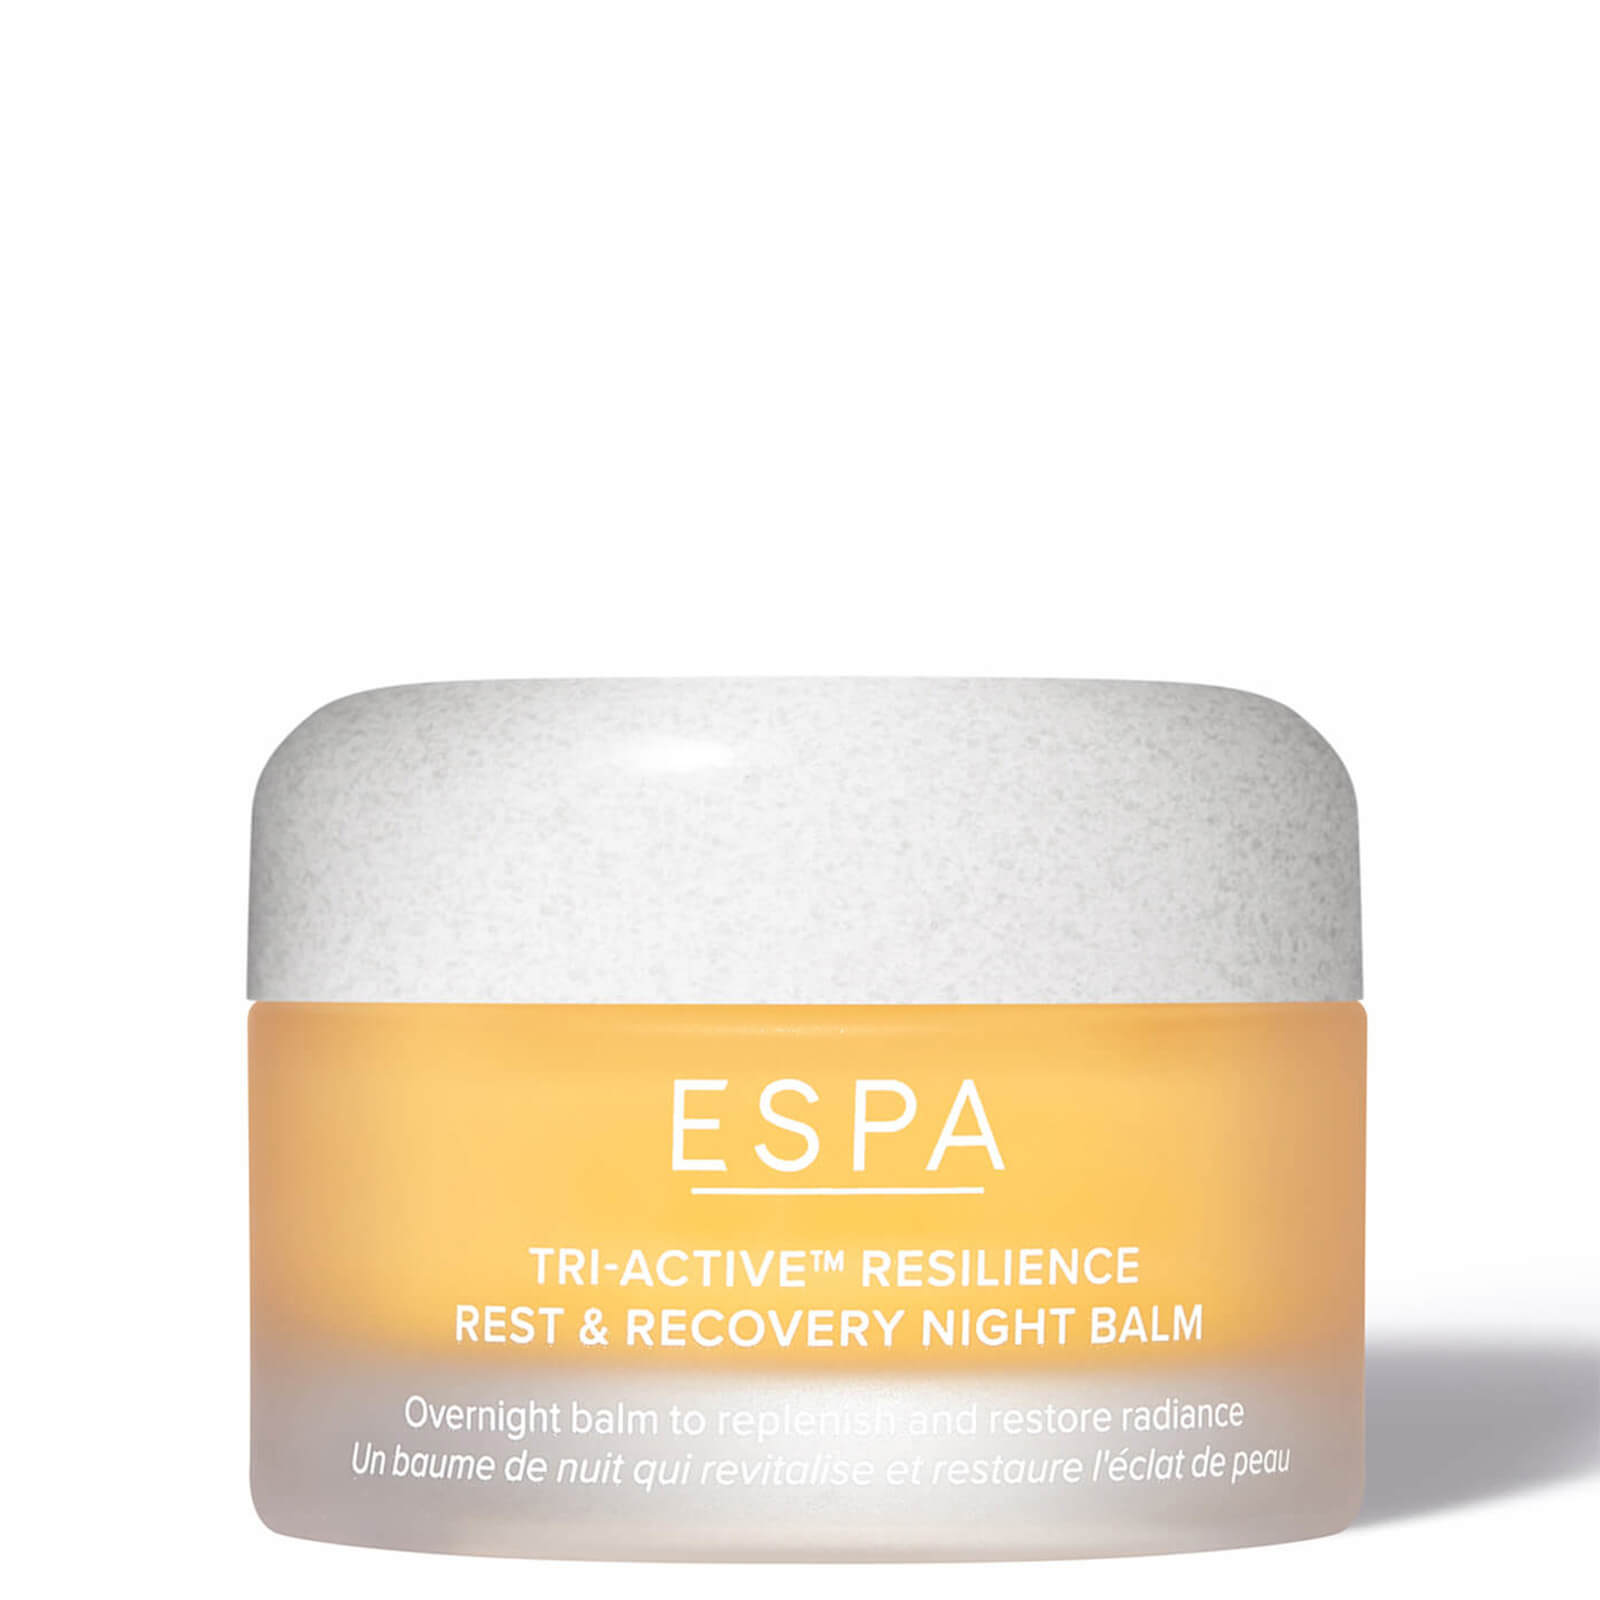 Espa Tri-active™ Resilience Rest And Recovery Night Balm